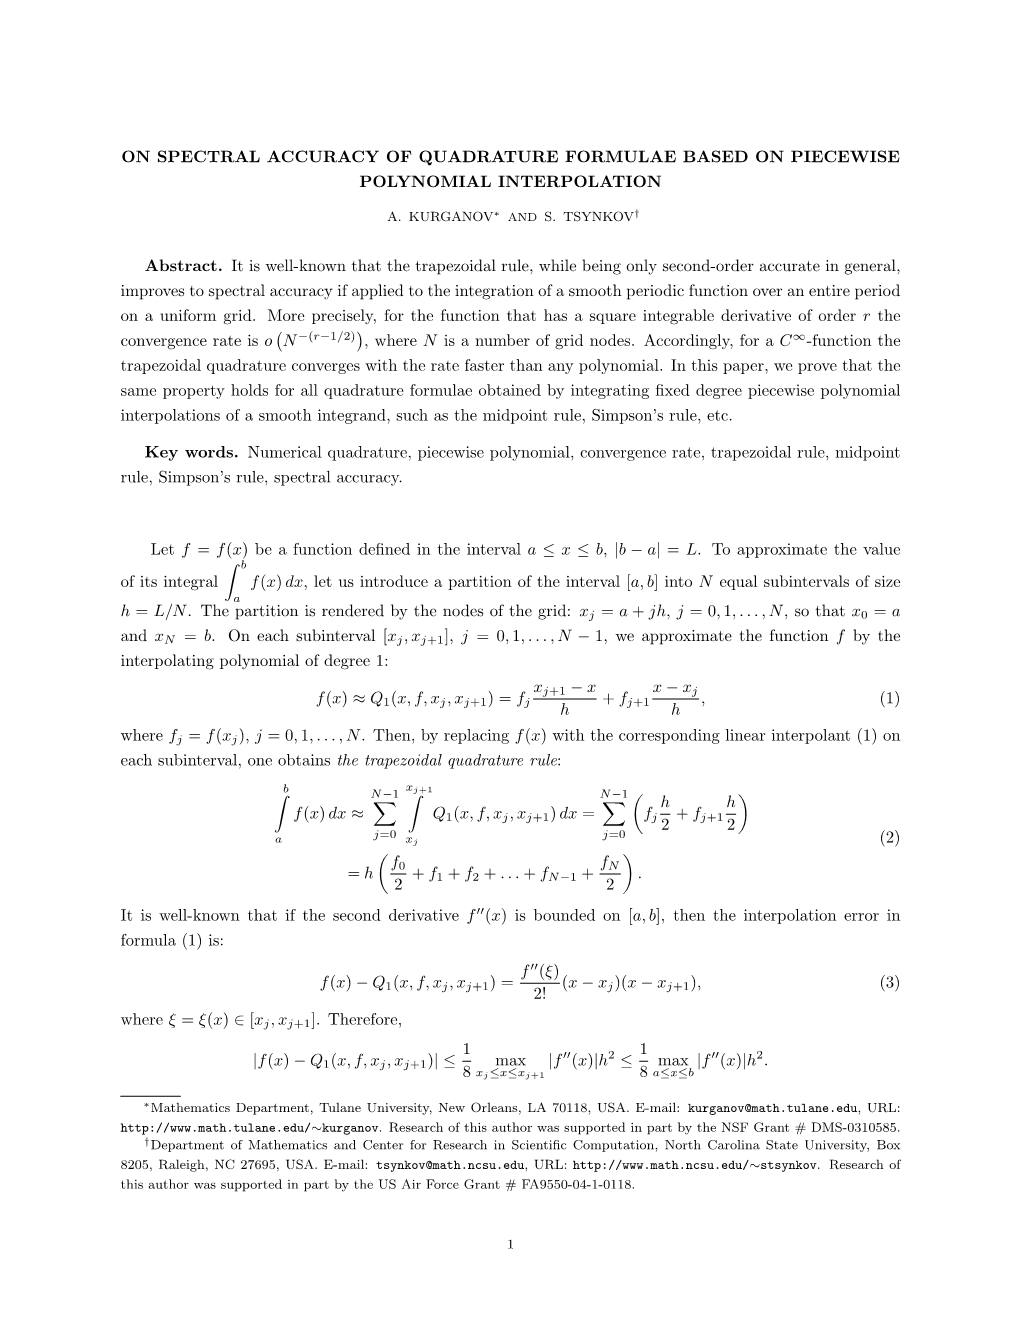 On Spectral Accuracy of Quadrature Formulae Based on Piecewise Polynomial Interpolation